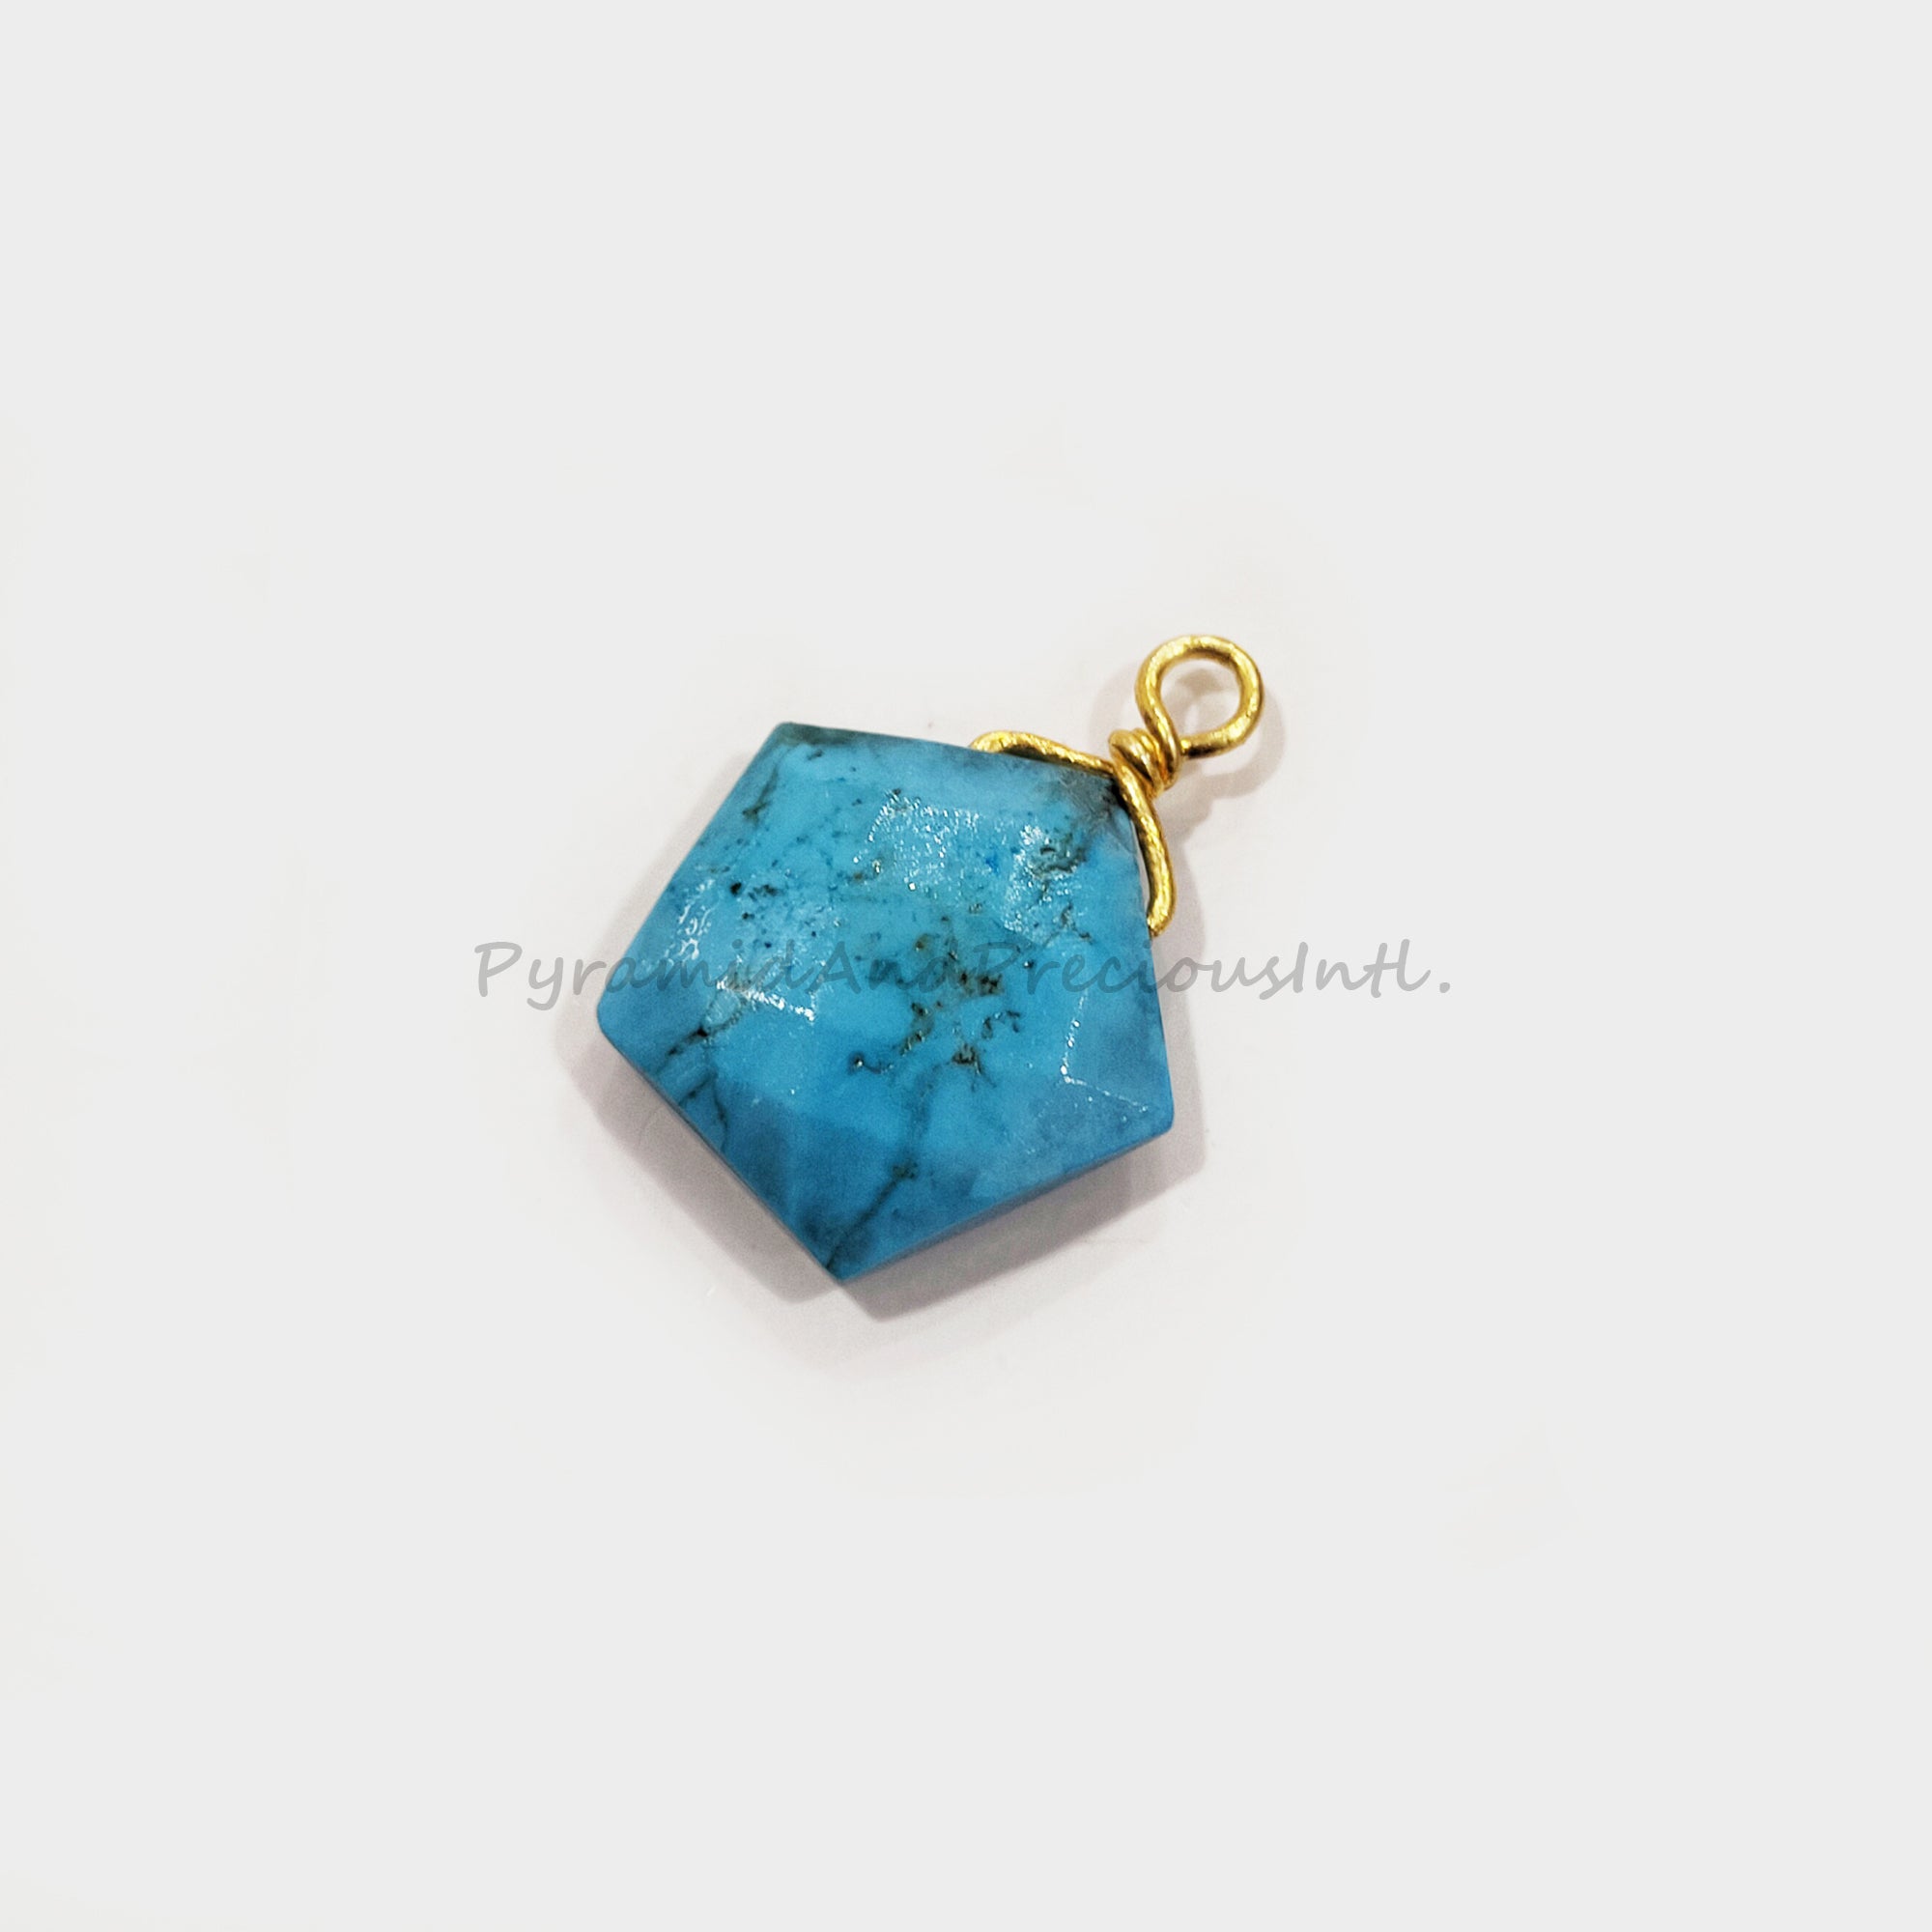 Turquoise Howlite Wire Wrap Pendant, Pentagon Shape Handmade Pendant, Gold Electroplated Necklace, December Birthstone